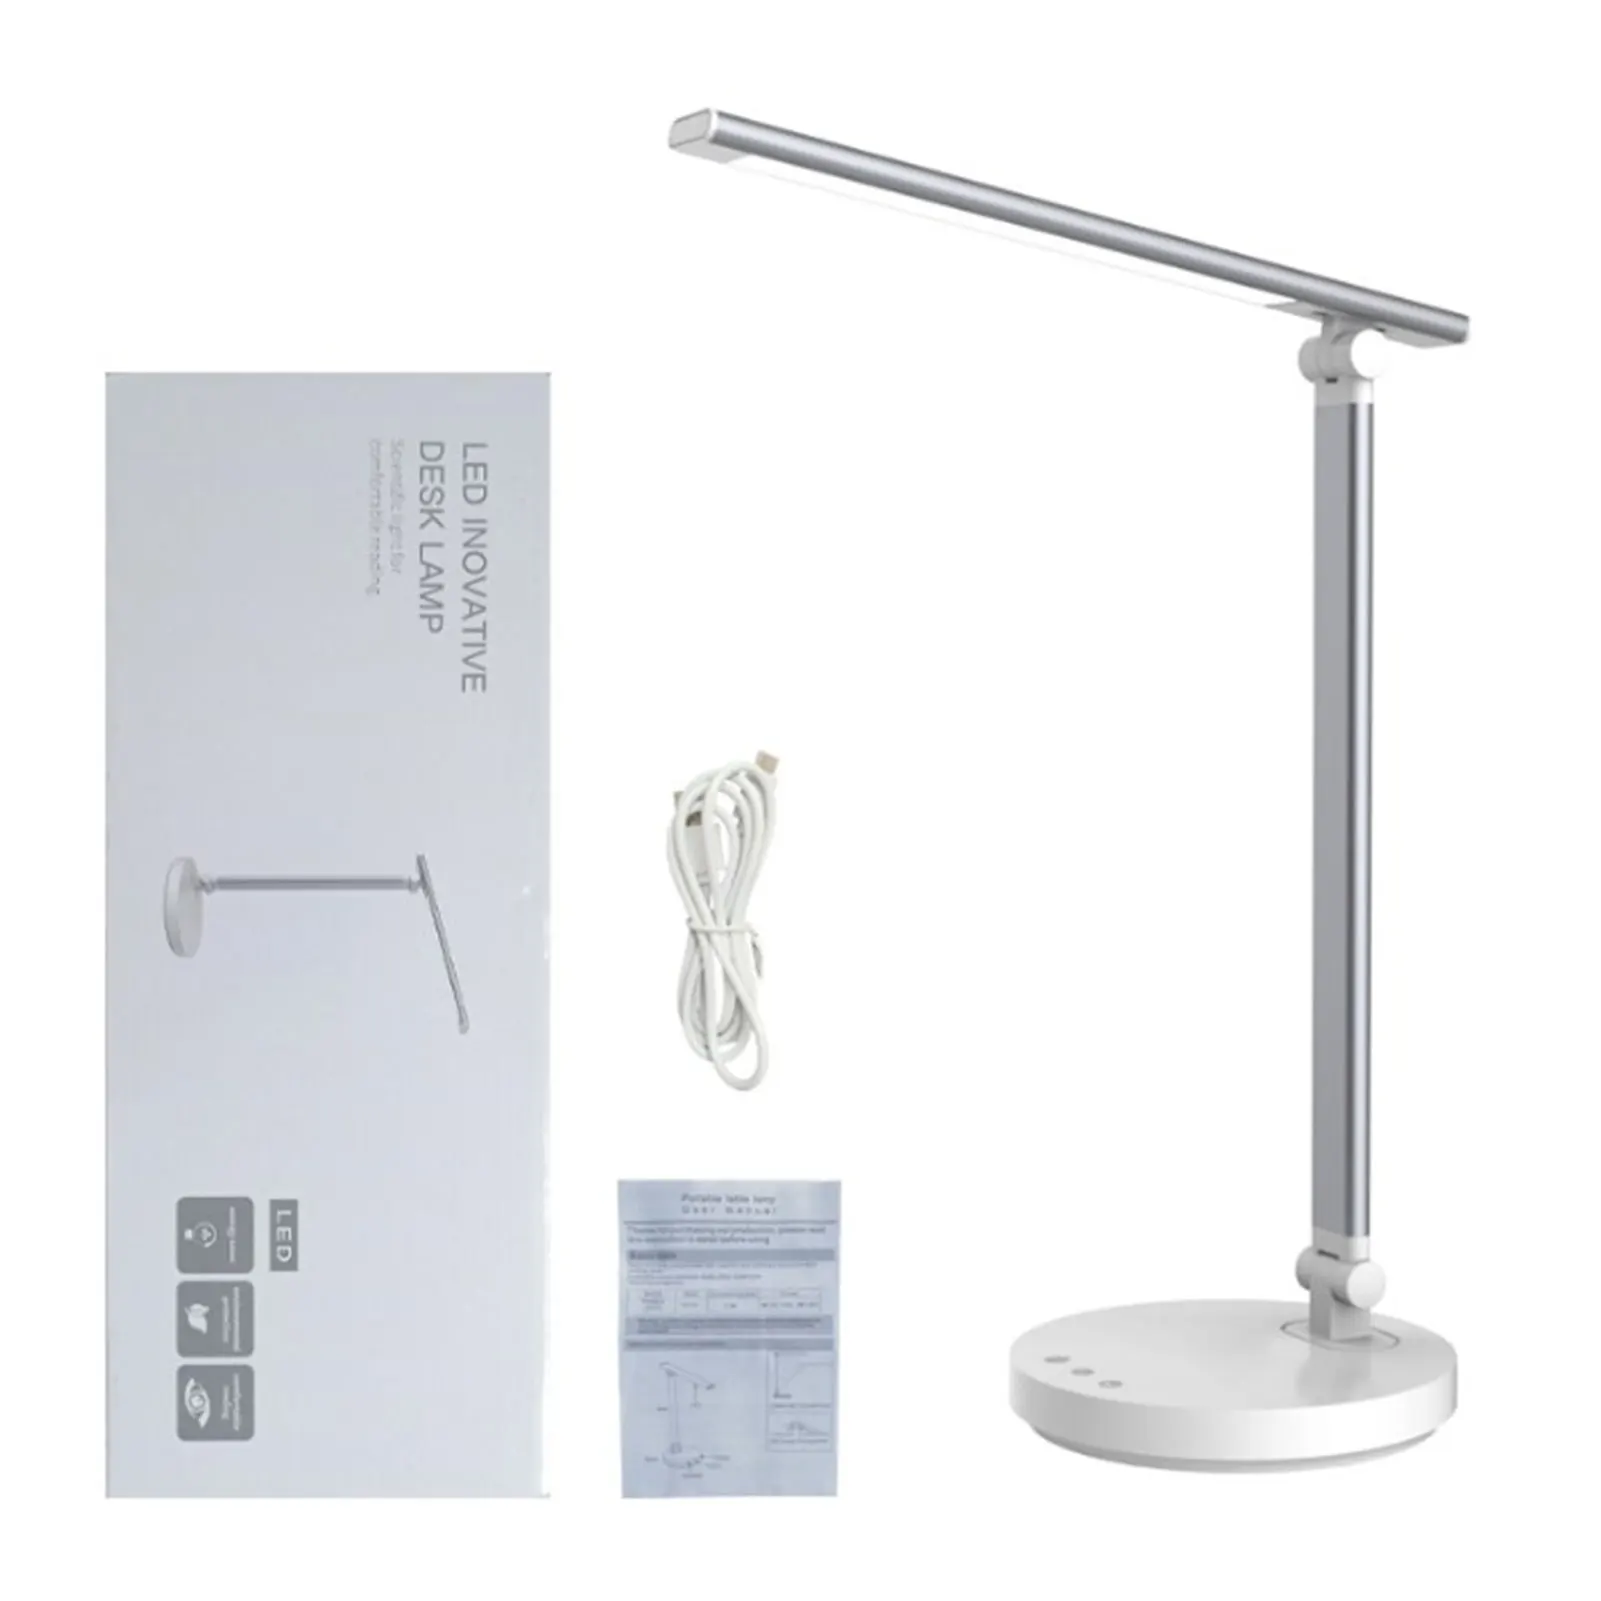 

Touch Control Office Kids Led Eye Caring Sleeping Dimmable Home Studying Desk Lamp USB Powered 5 Lighting Modes Timer